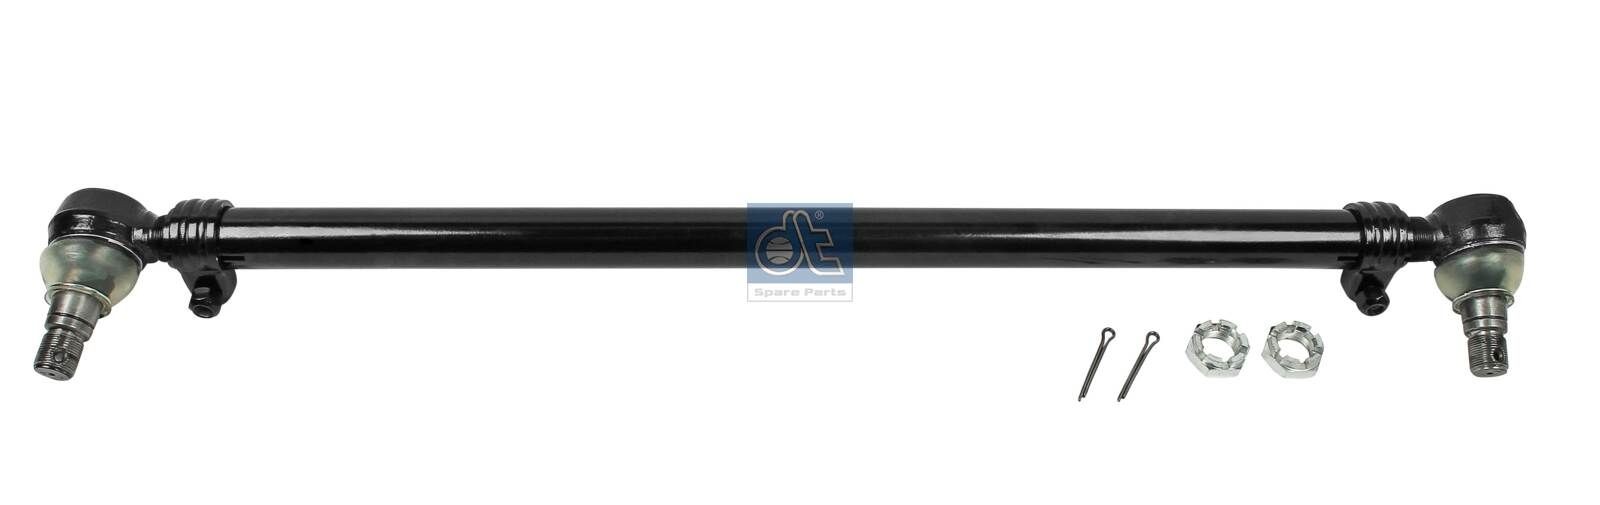 DT Spare Parts 4.65664 Rod Assembly